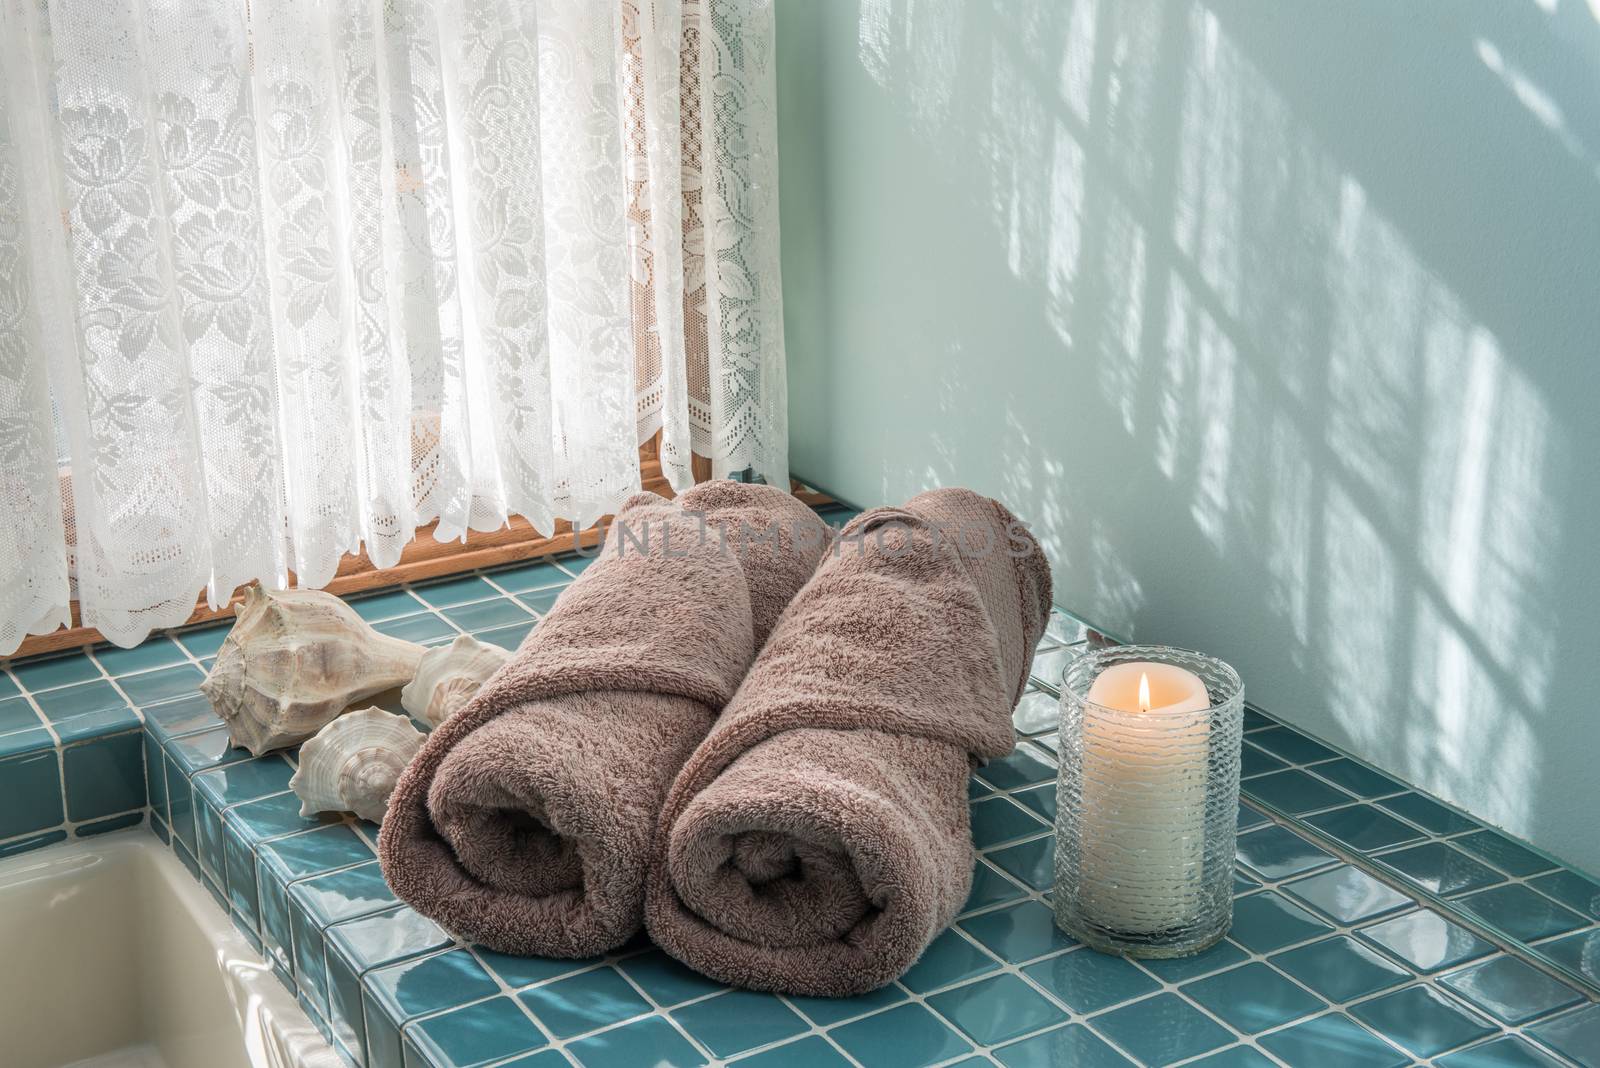 Master Bath Luxury Towels and Candle by krisblackphotography